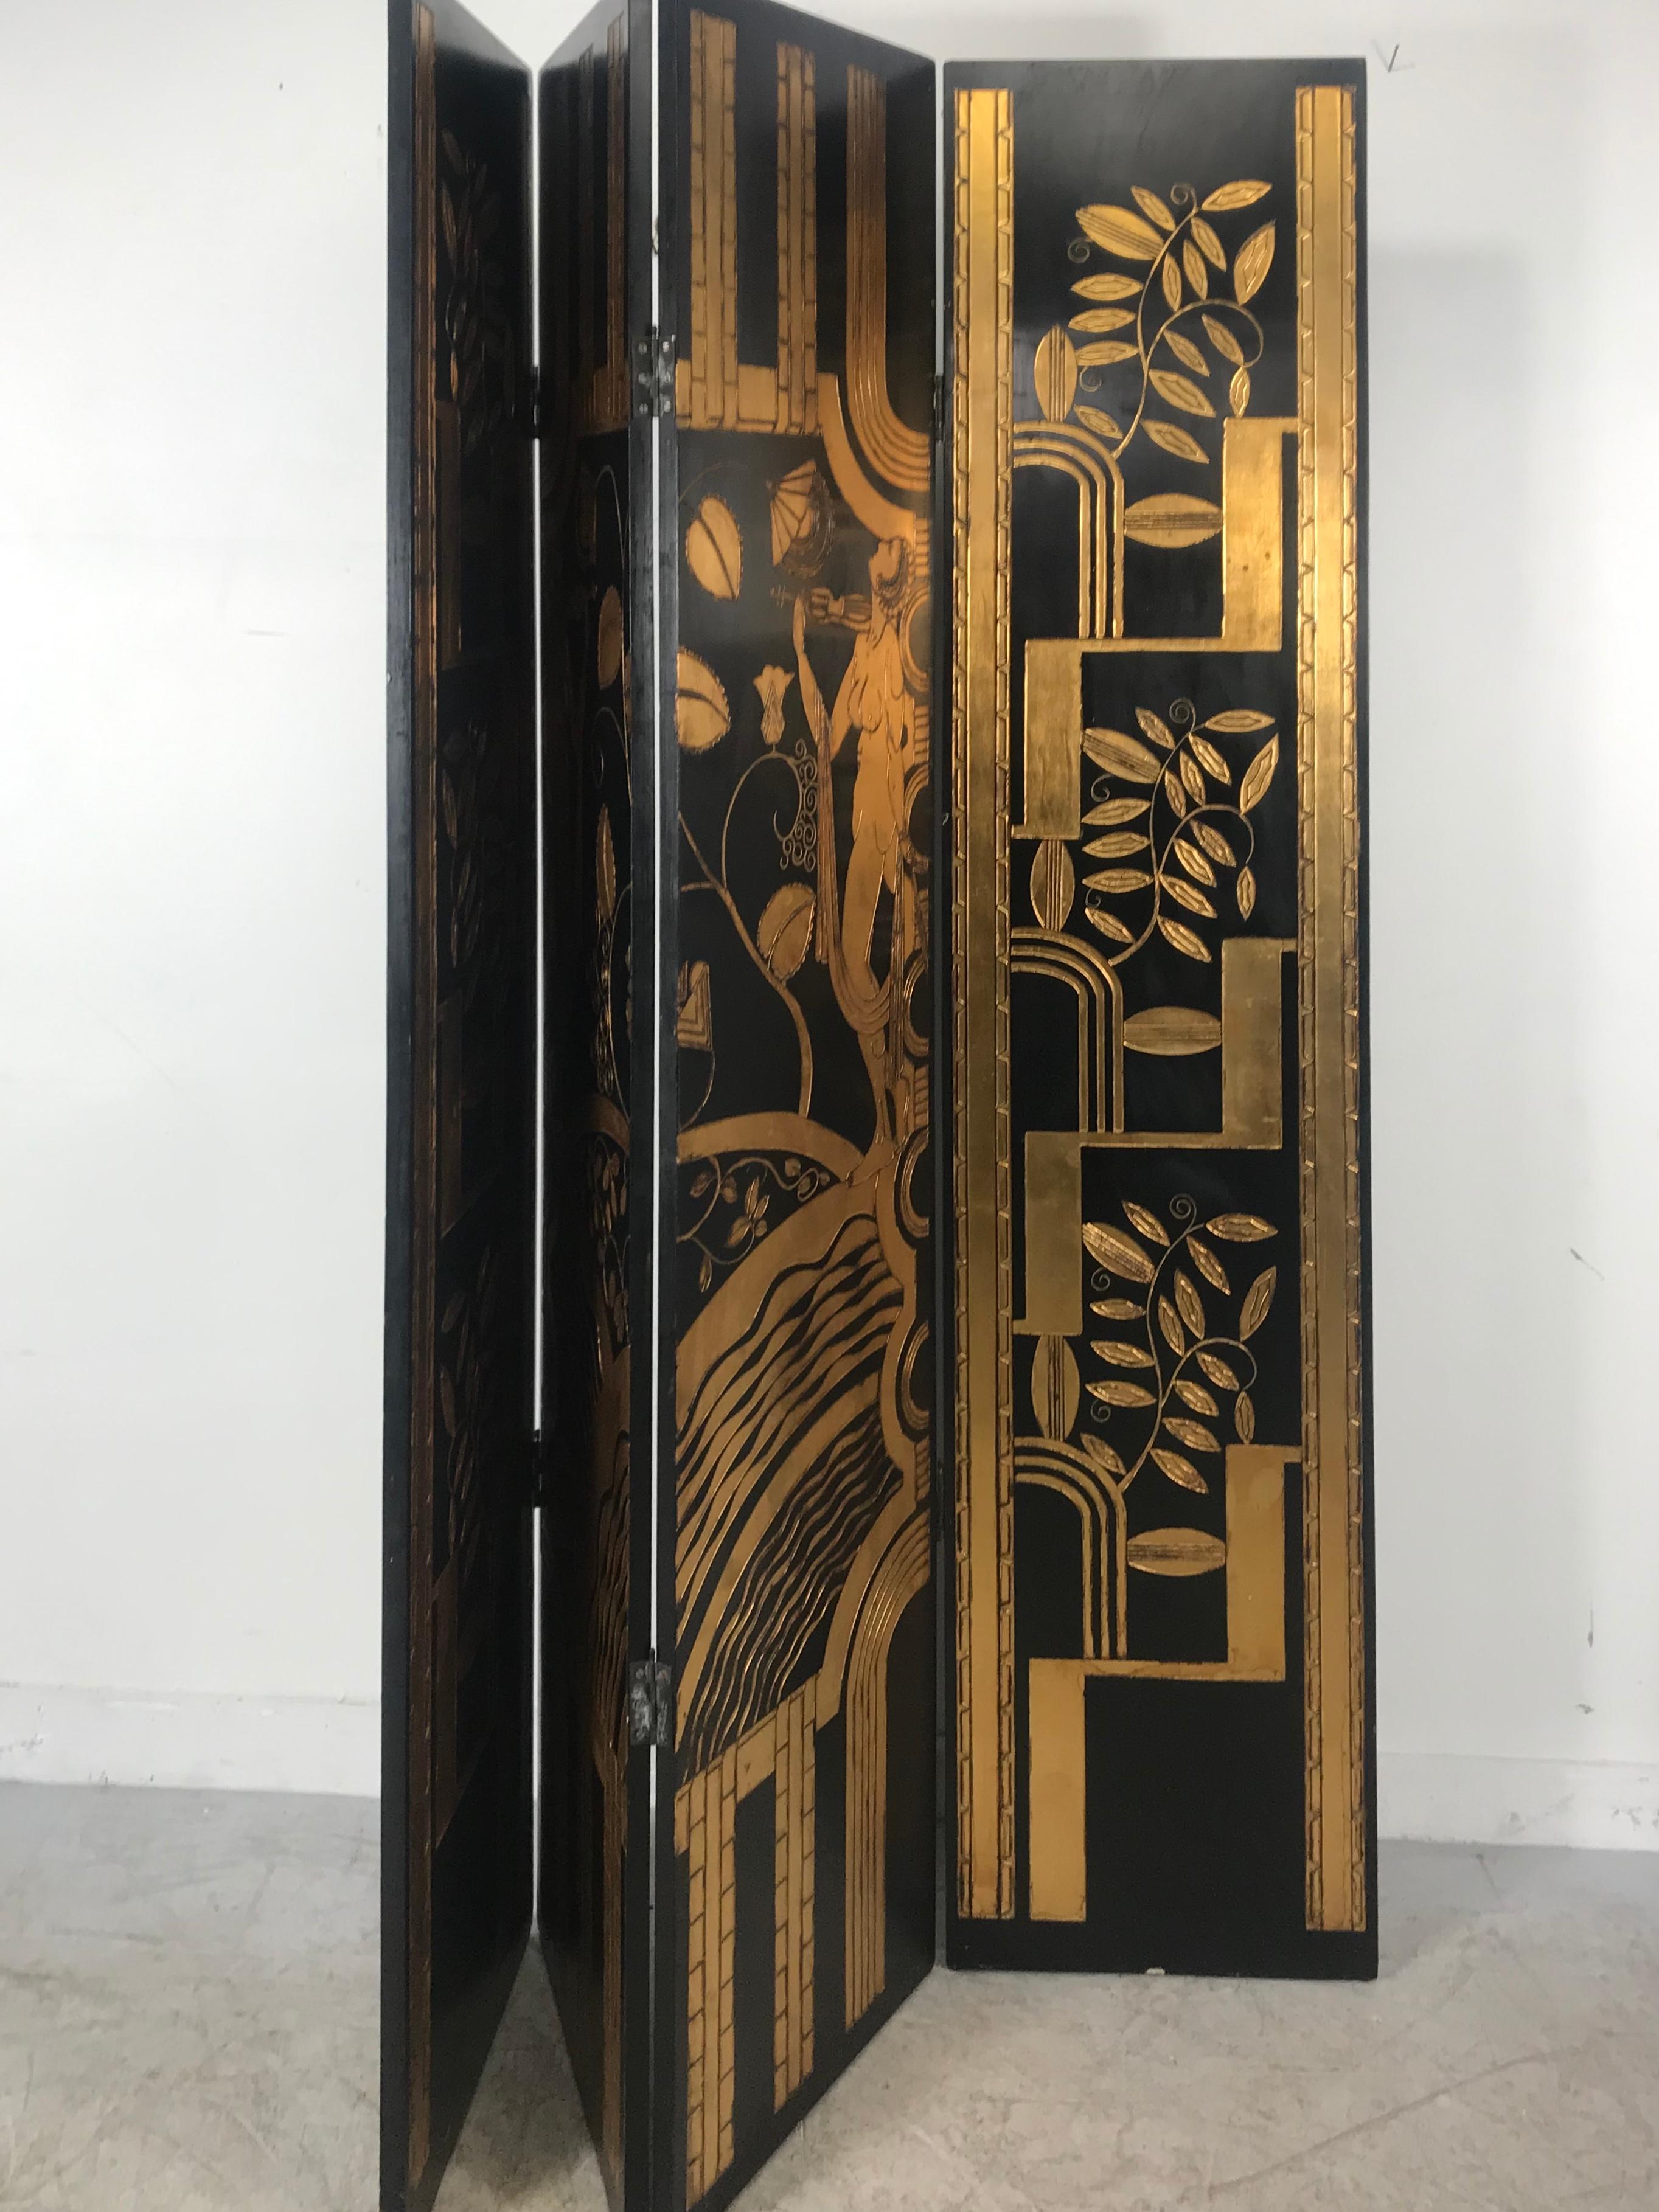 Late 20th Century Art Deco Revival 4 Panel Screen / Room Divider, Carved and Gilt, Woman Motif